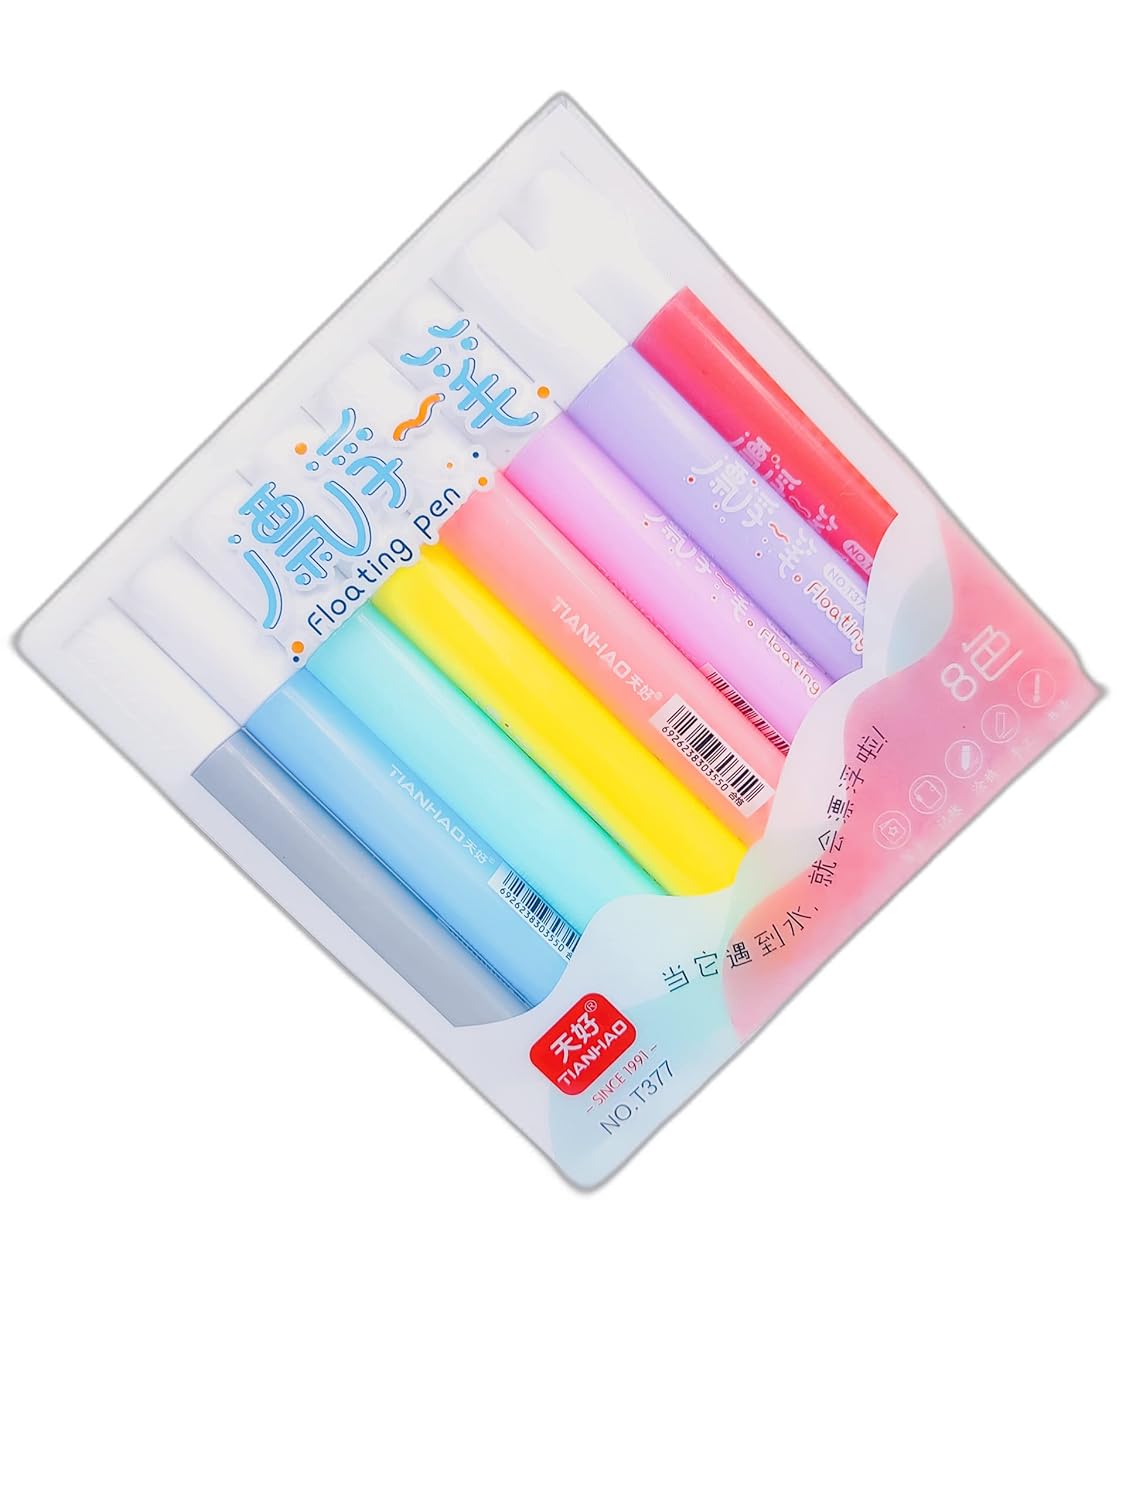 Floating Pen 8 Colors Doodle Pen Children's Colorful Marker Pen Magical Water Painting Pen Easy -to-Wipe Dry Erase Whiteboard Pen Doodle Water Floating Pen.